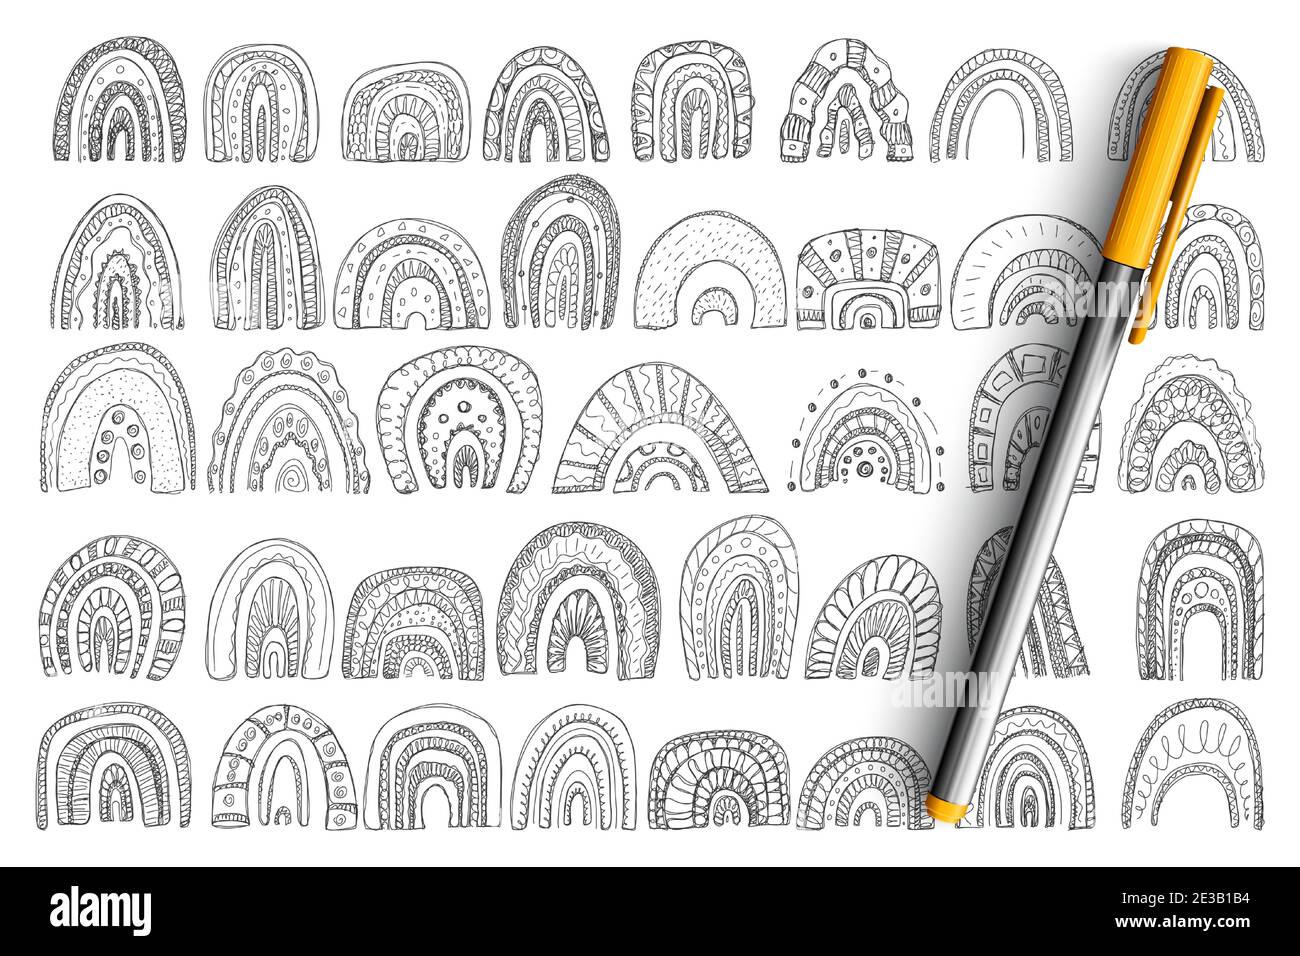 Arches and rainbows shapes doodle set. Collection of hand drawn arches shapes of different layers sizes and patterns in rows isolated on transparent background. Illustration of geometrical arcs Stock Vector